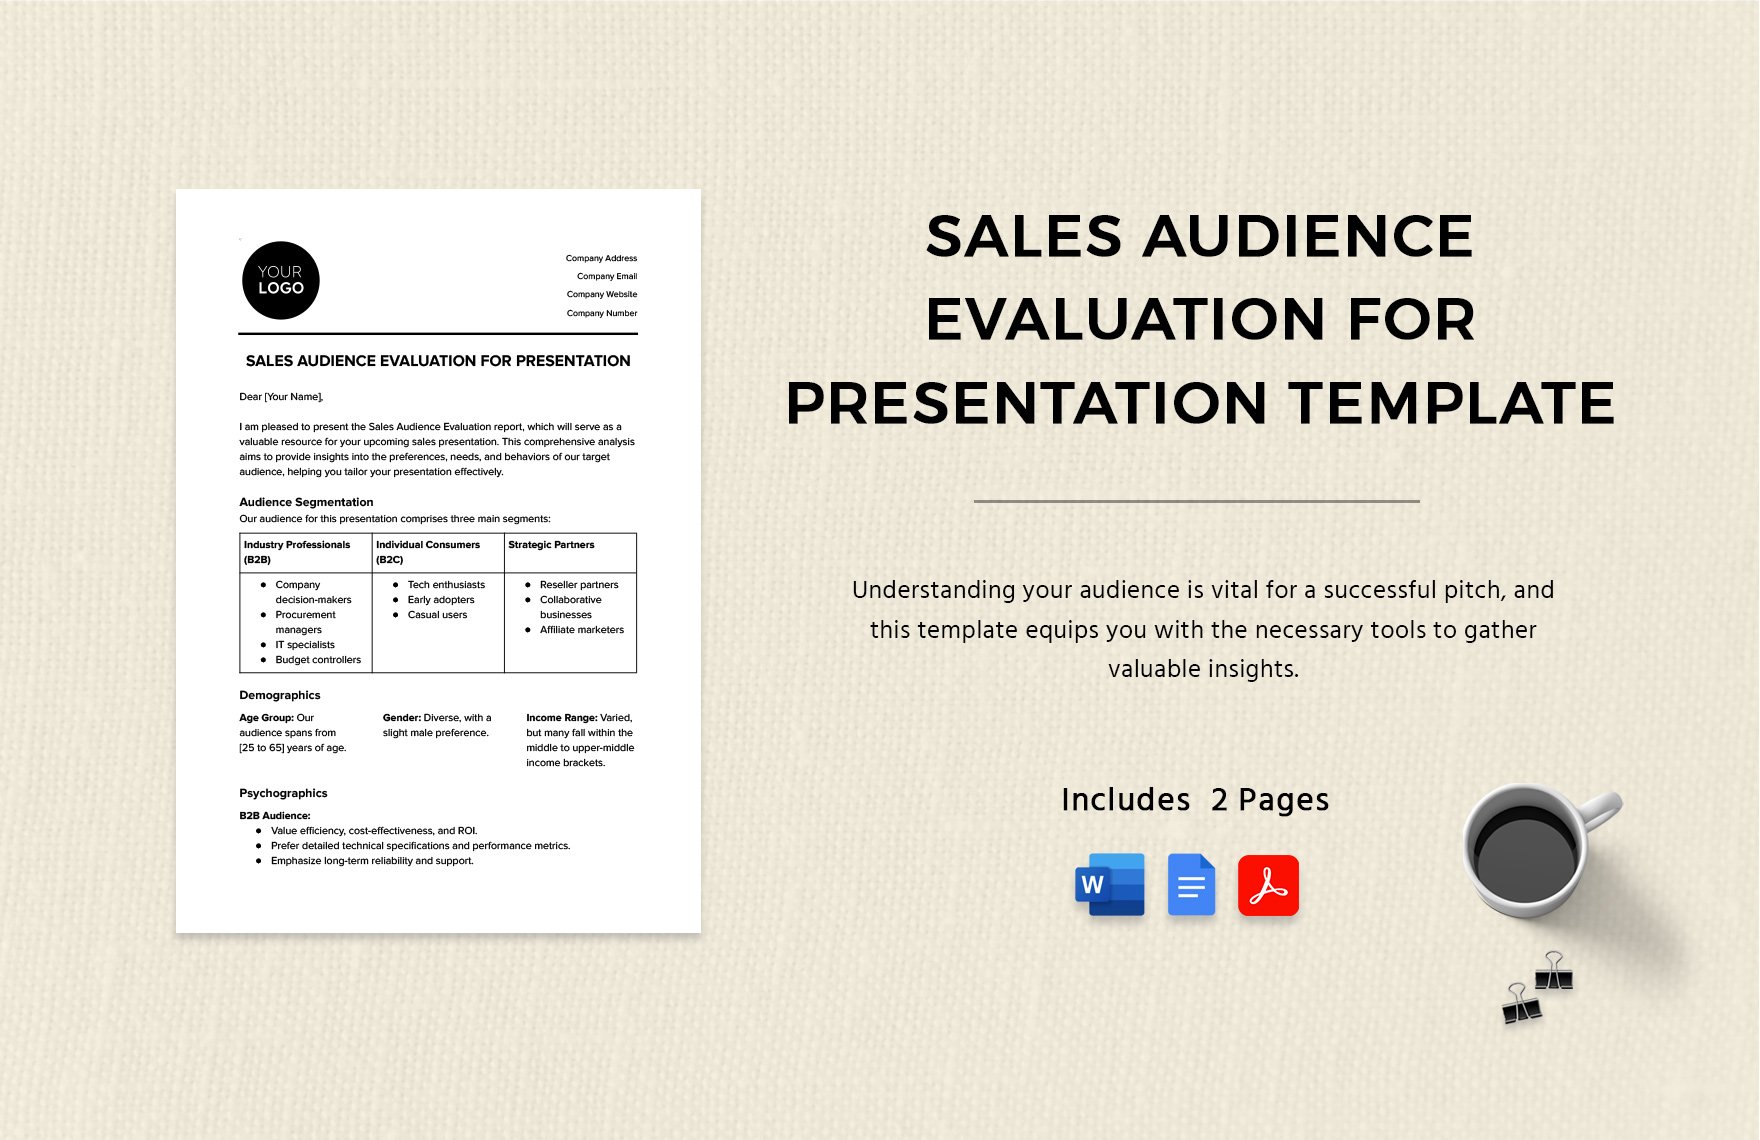 Sales Audience Evaluation for Presentation Template in Word, Google Docs, PDF